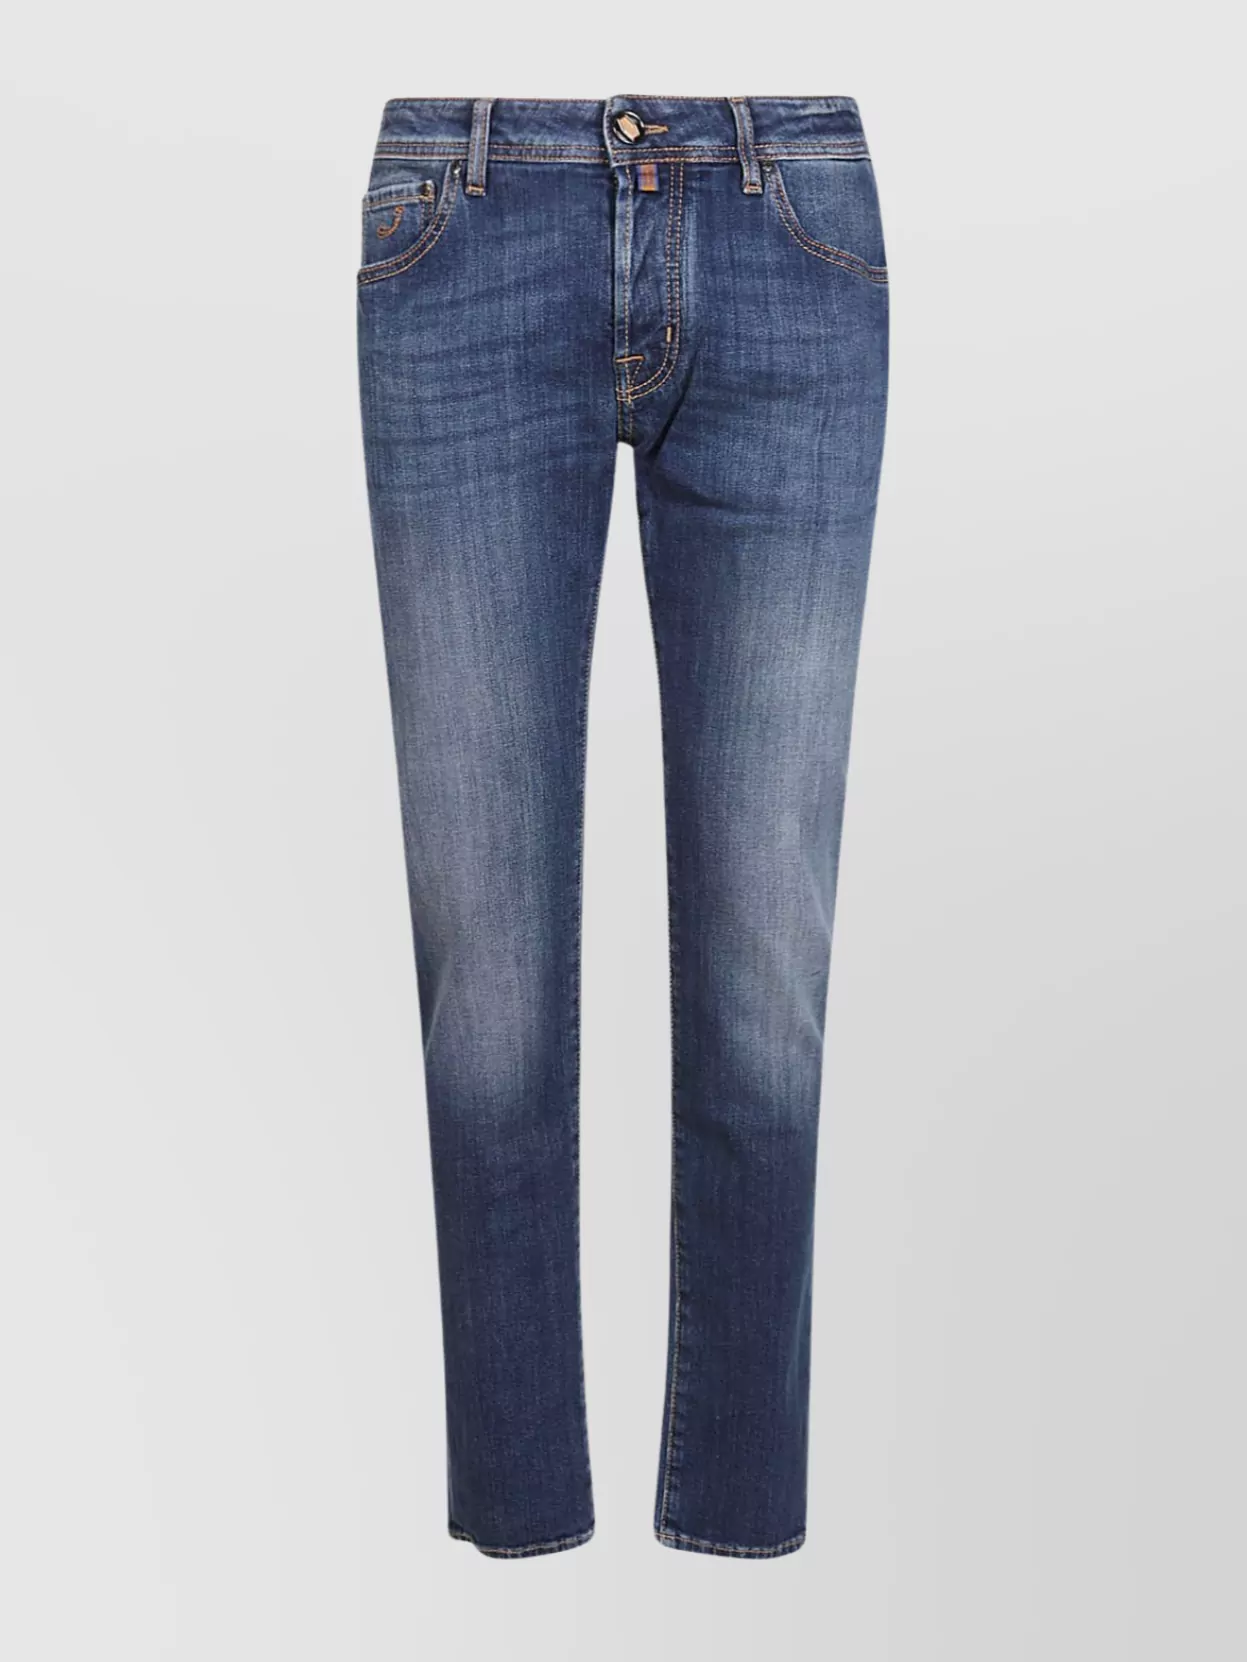 JACOB COHEN BOOTCUT STREAMLINE FADED WASH